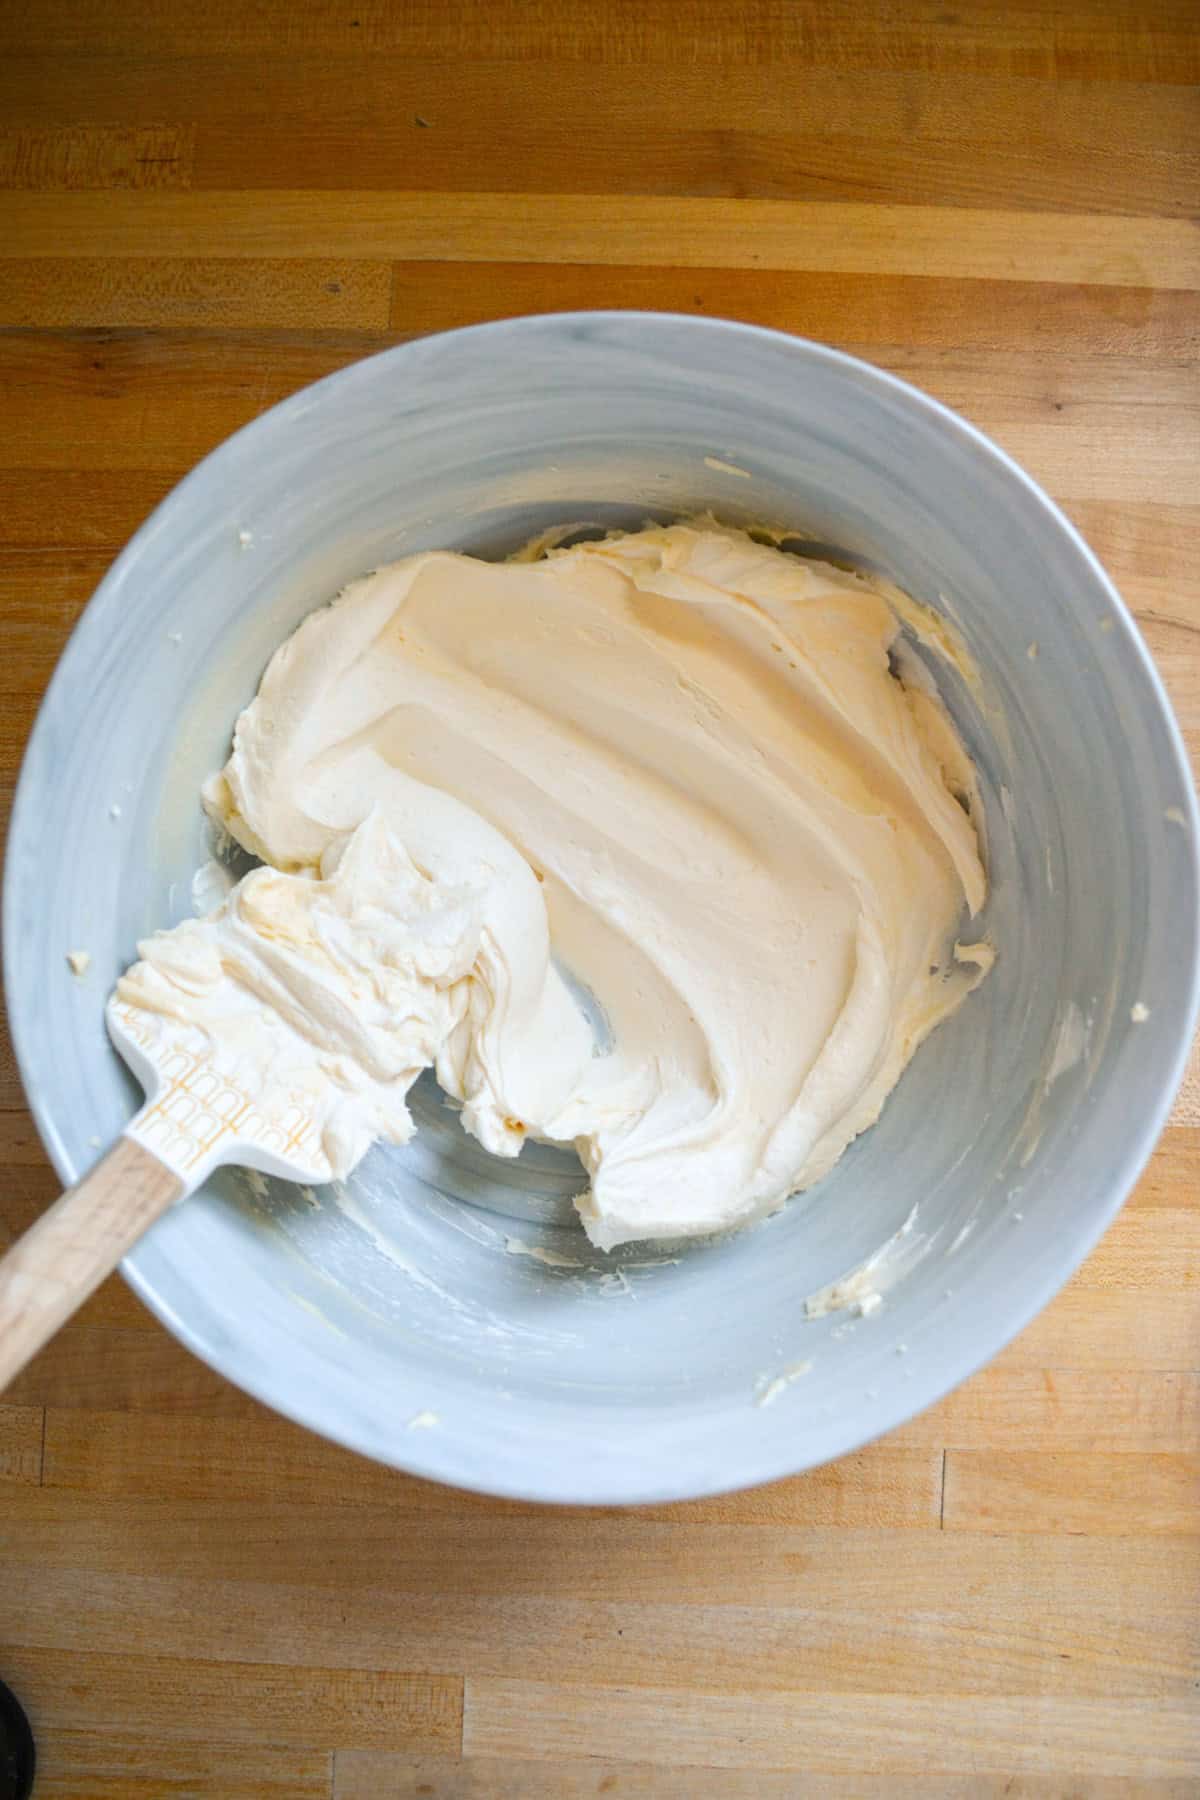 Vegan butter and cream cheese creamed together in a mixing bowl with a rubber spatula in the bowl.